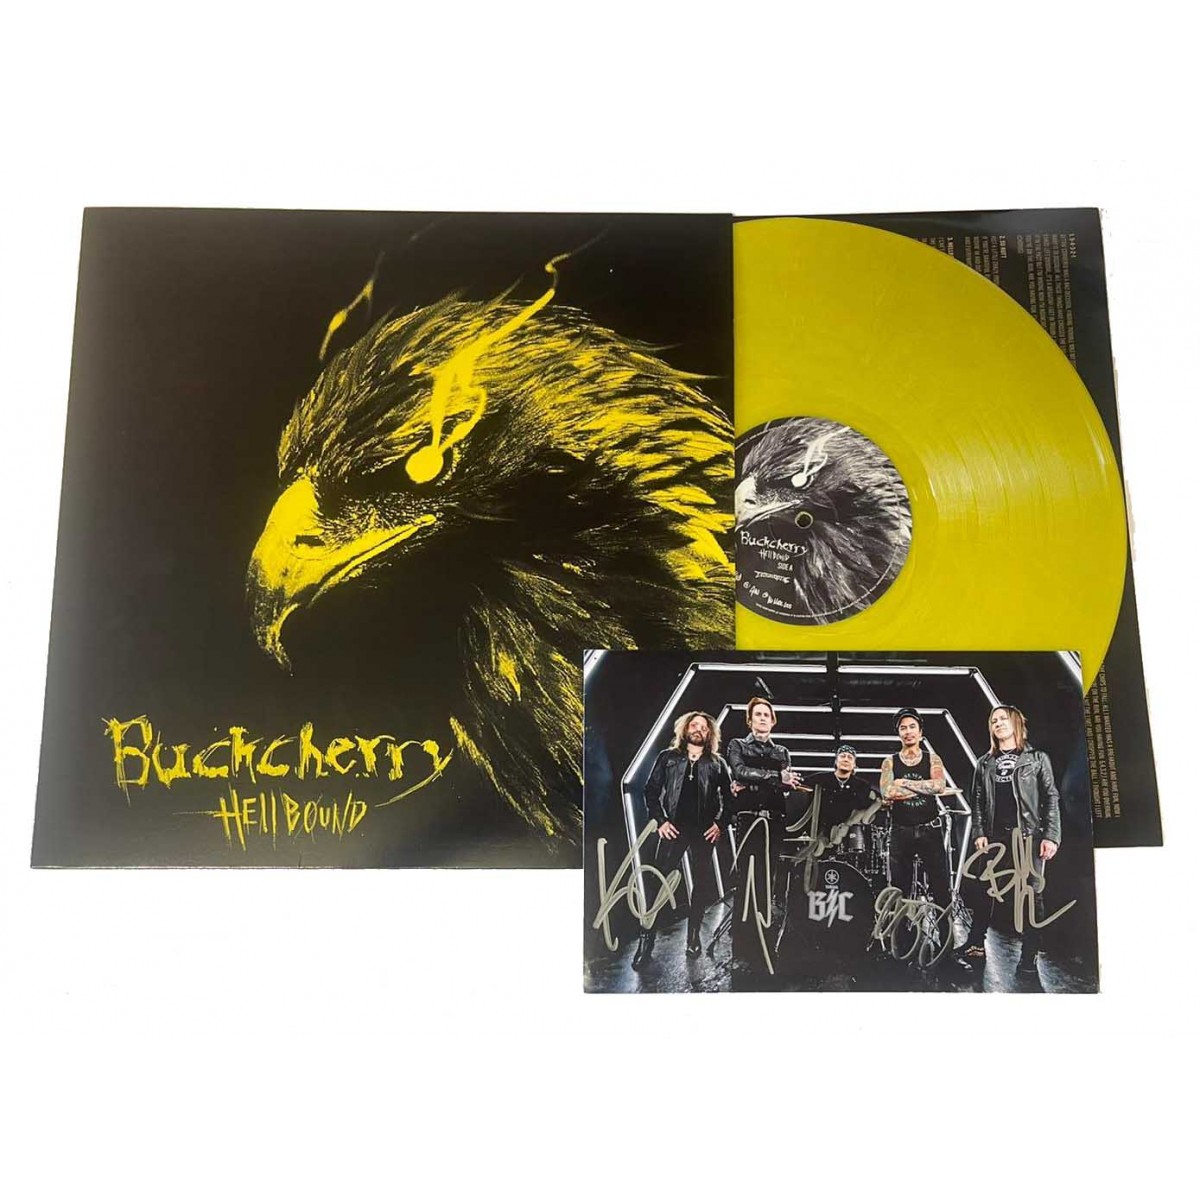 Buckcherry - 'Hellbound' SIGNED Yellow Vinyl w/ Unique Yellow Cover